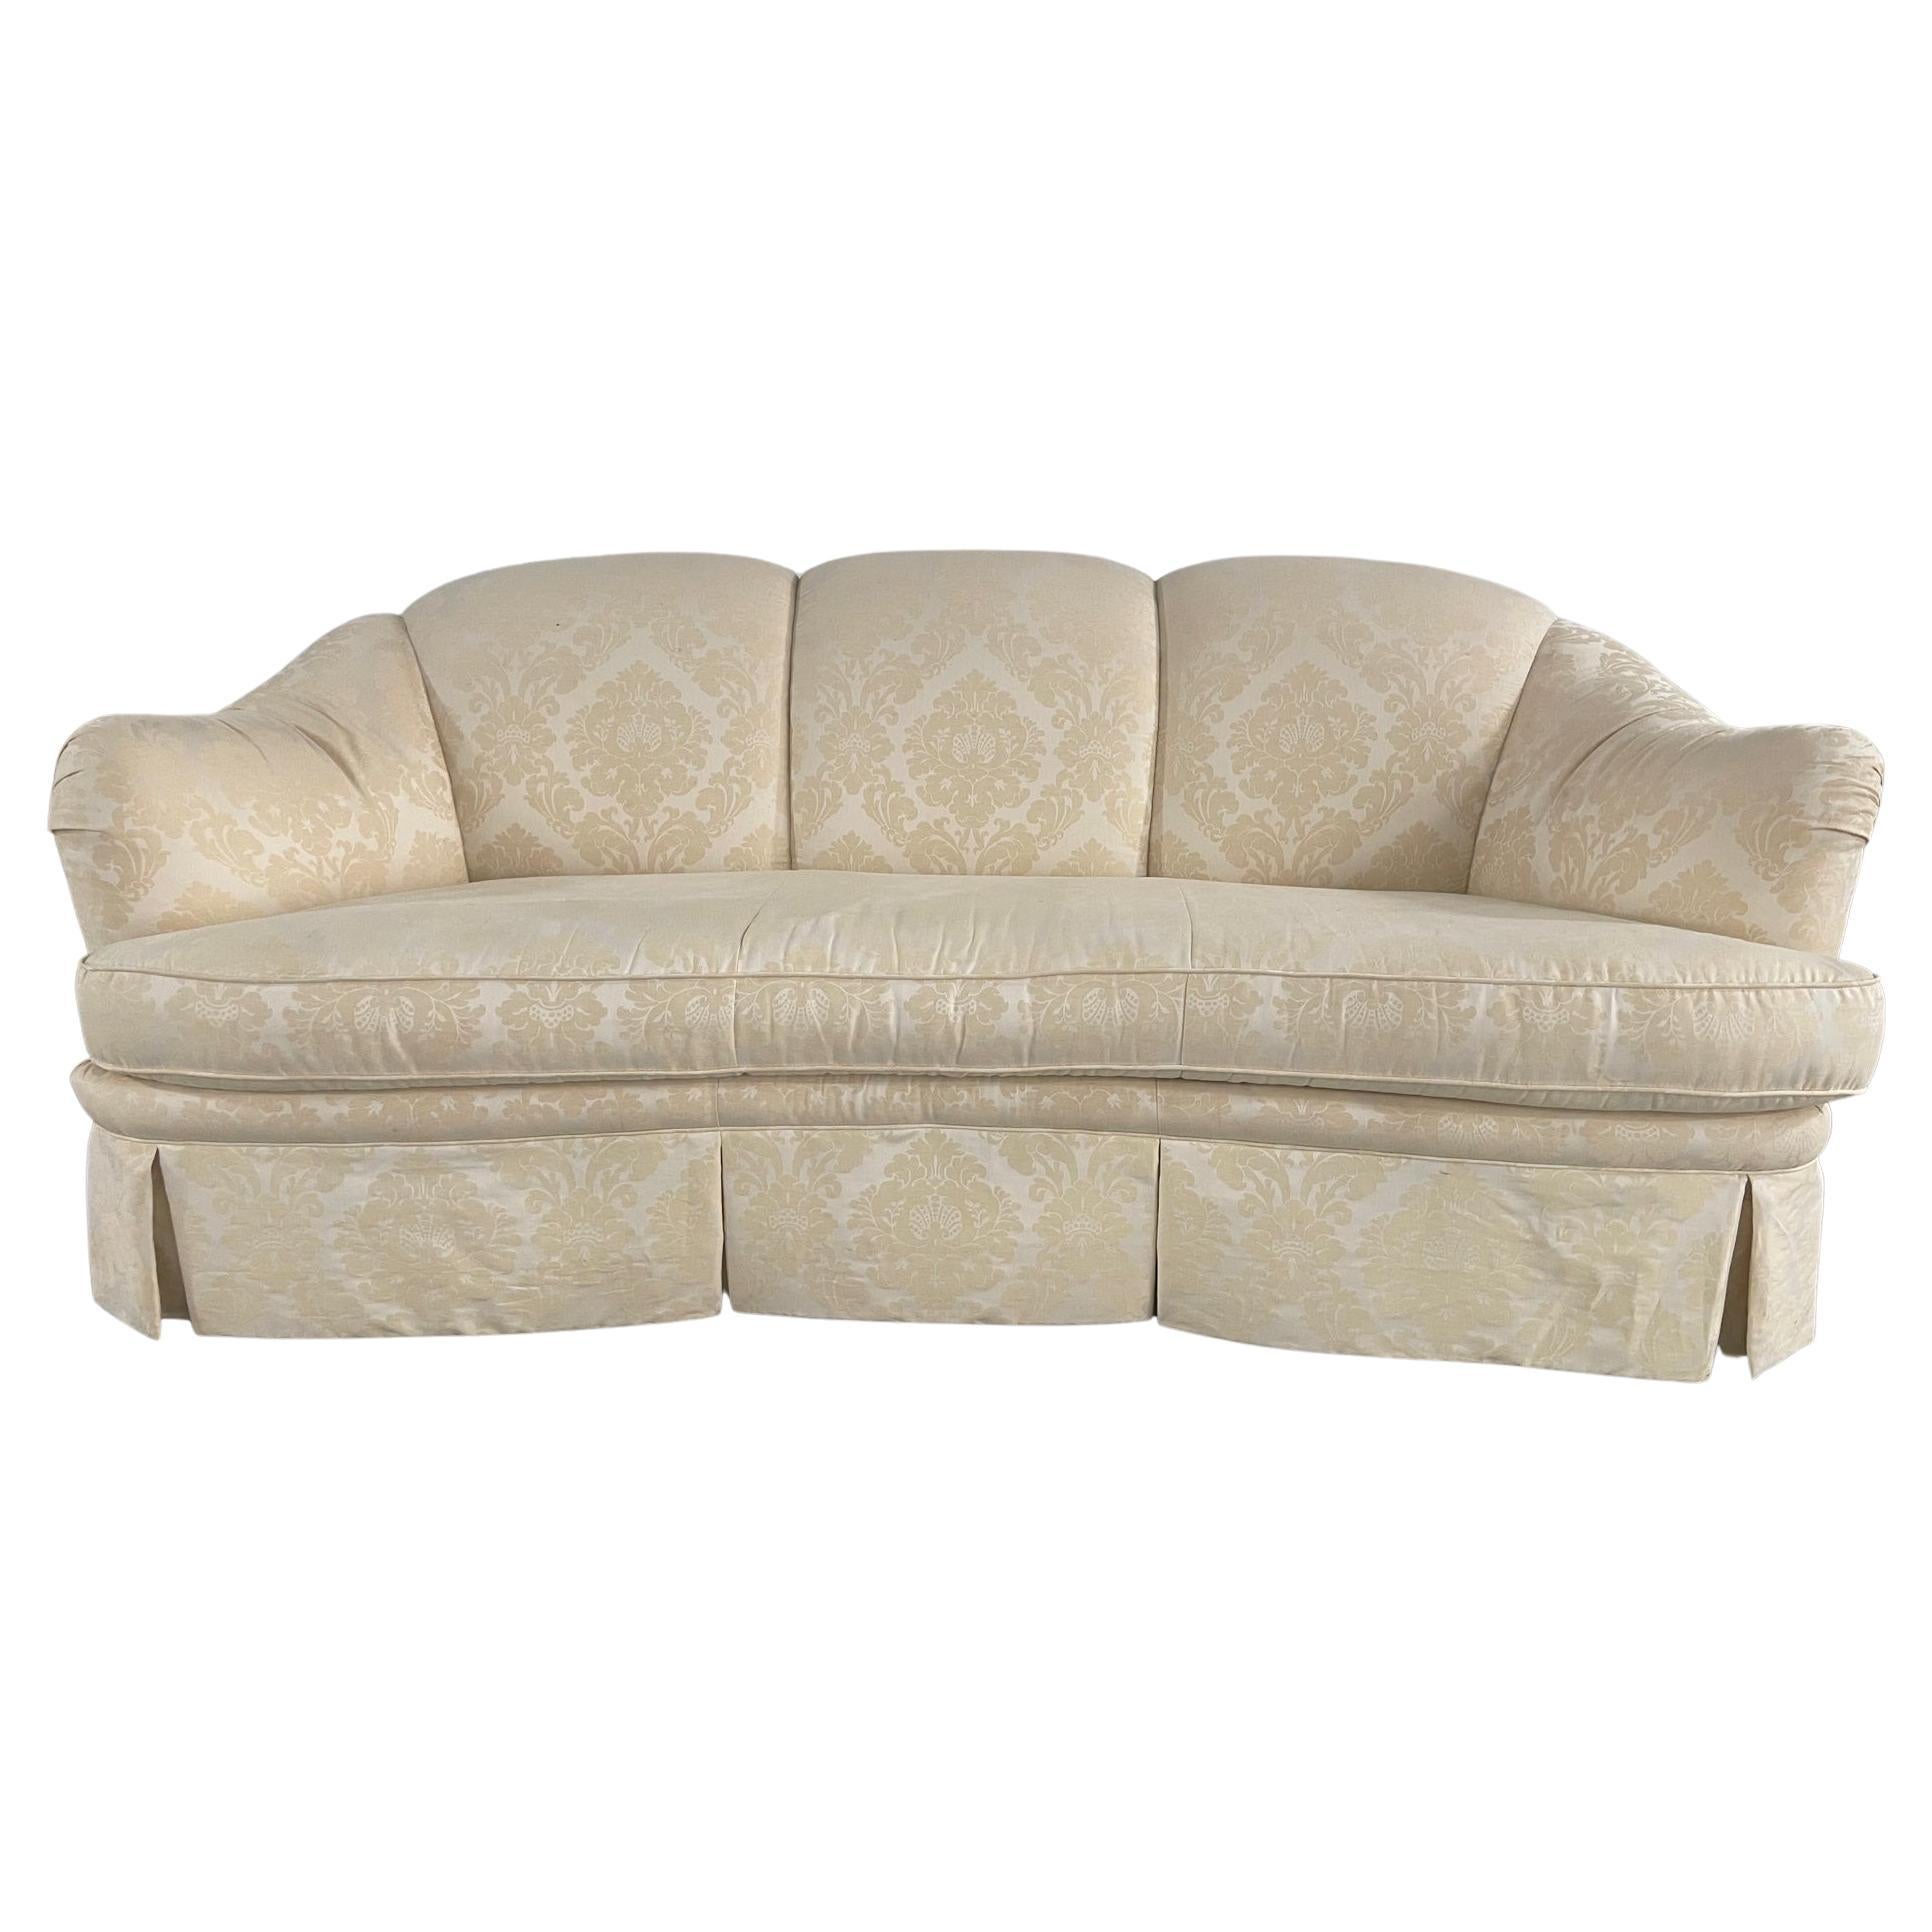 English Scalloped Style Arm Sofa with a Serpentine Front, 20th Century For Sale